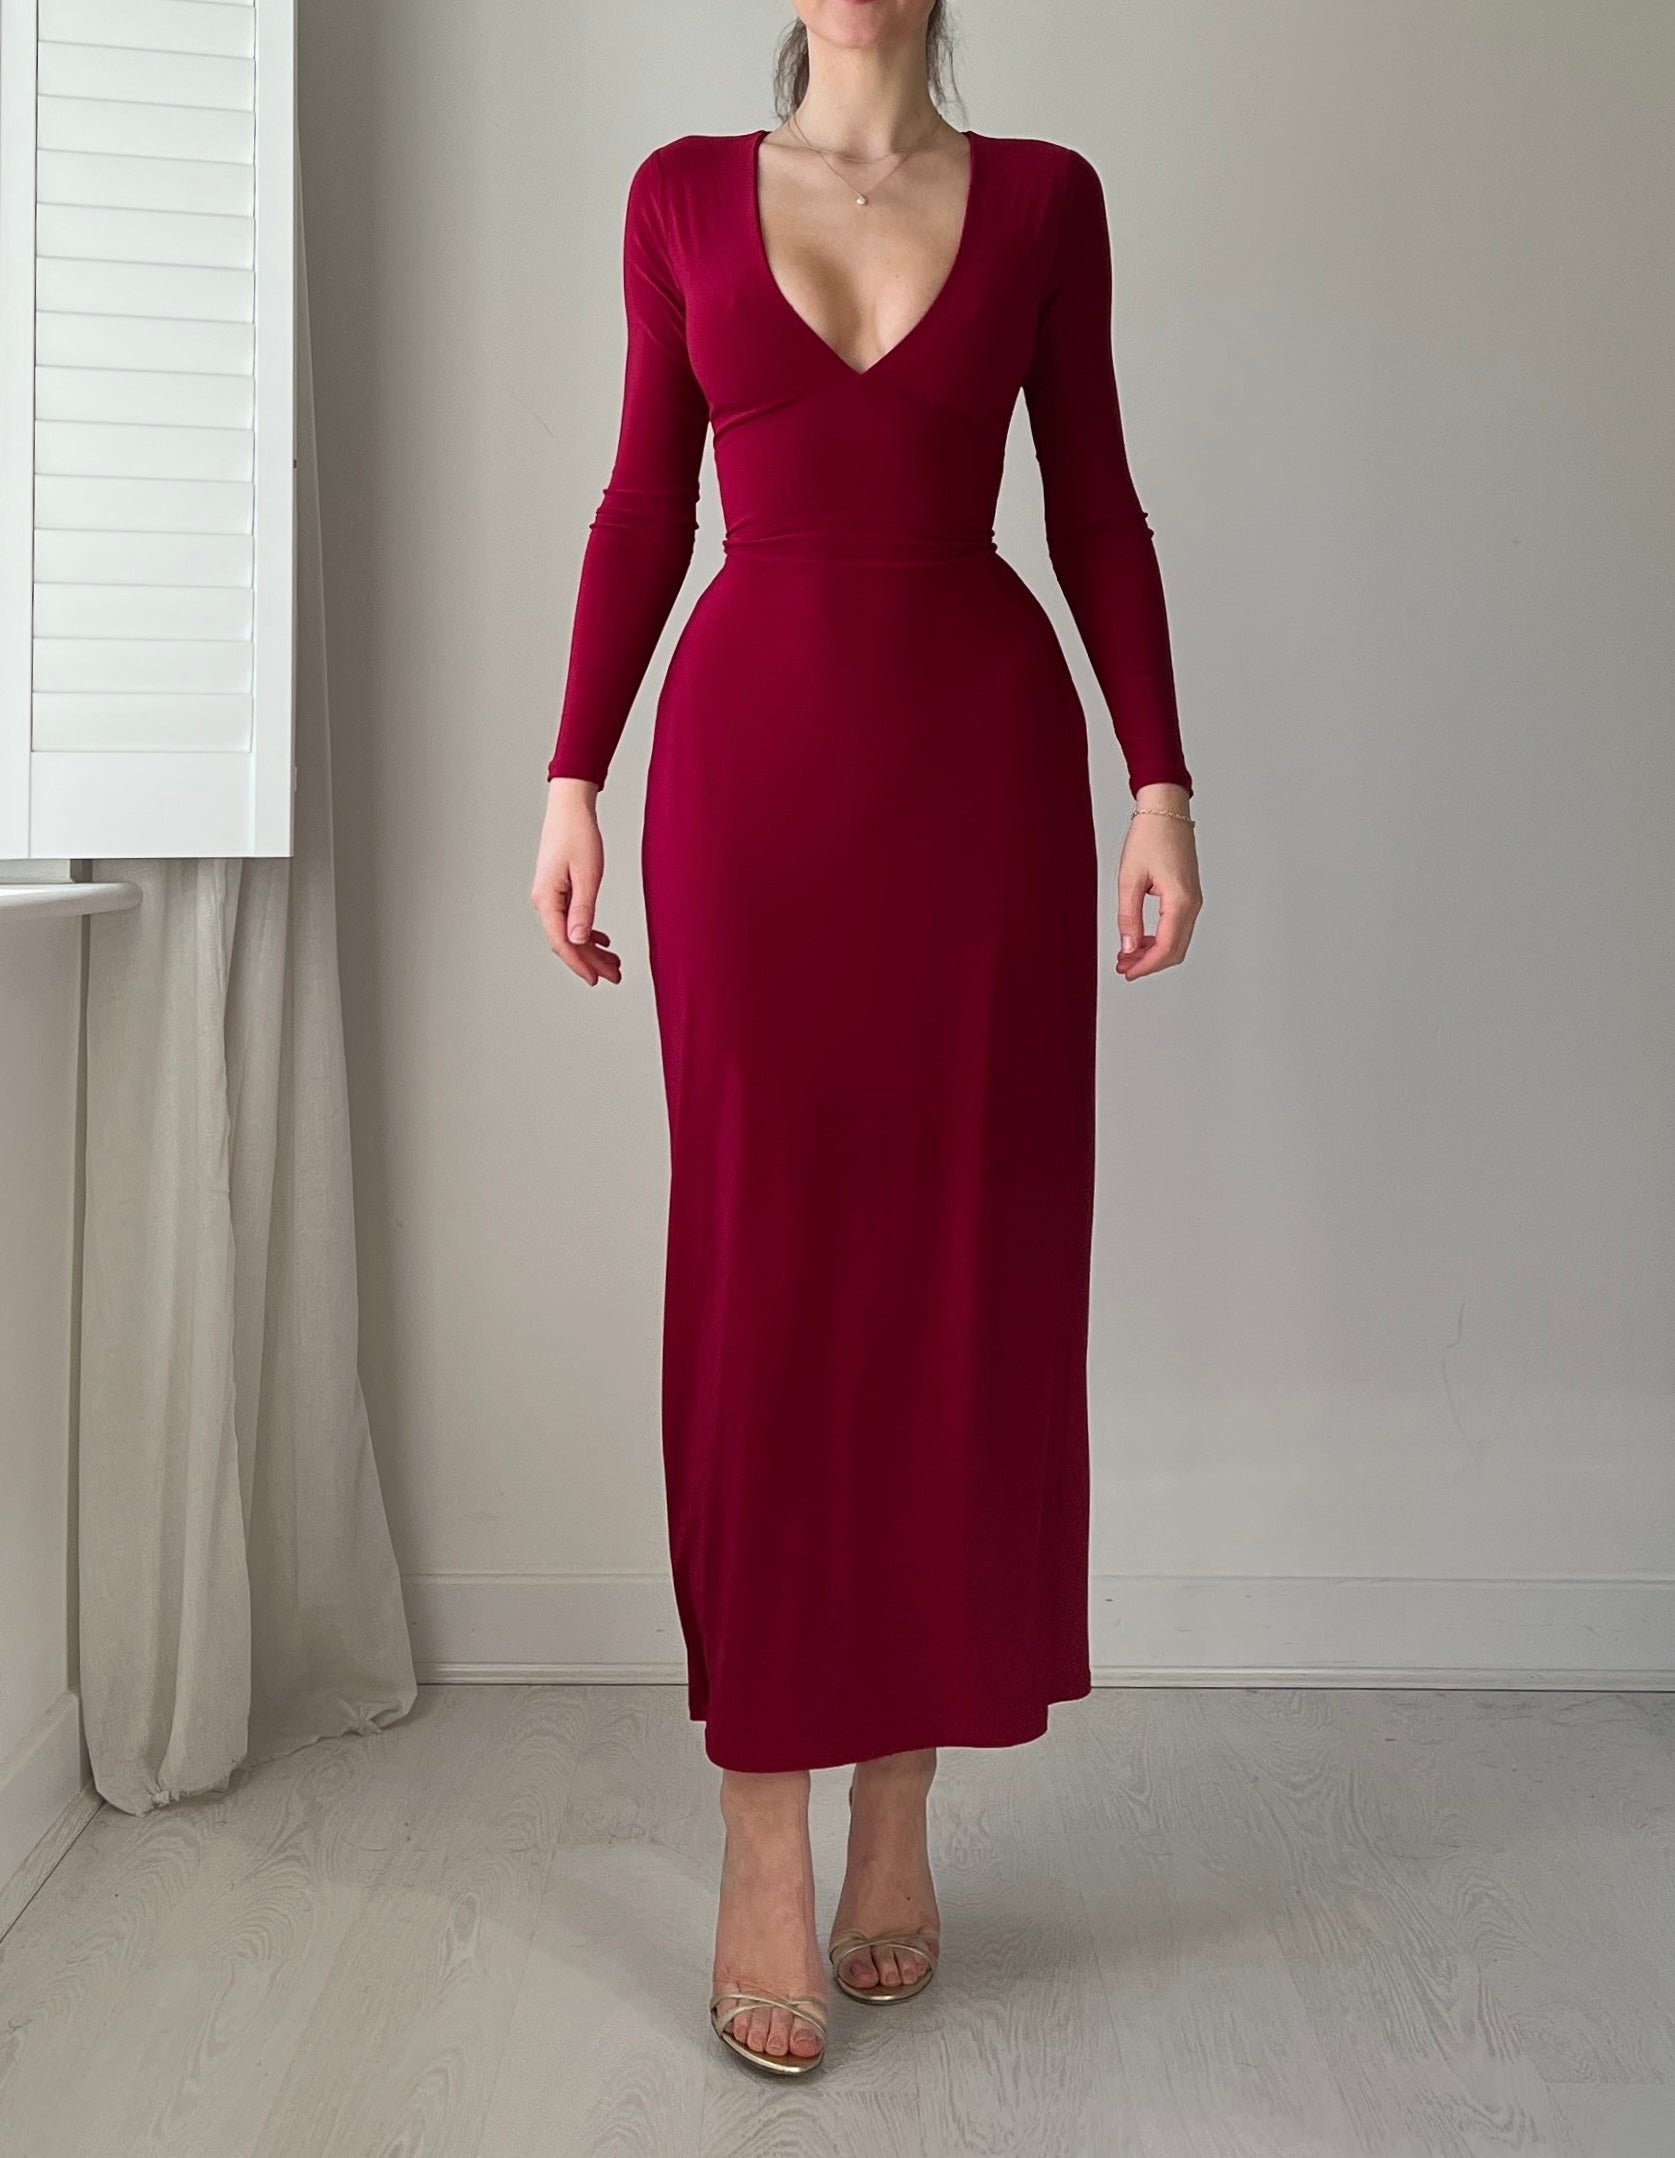 The Harper Maxi Dress has just launched - AYM Studio